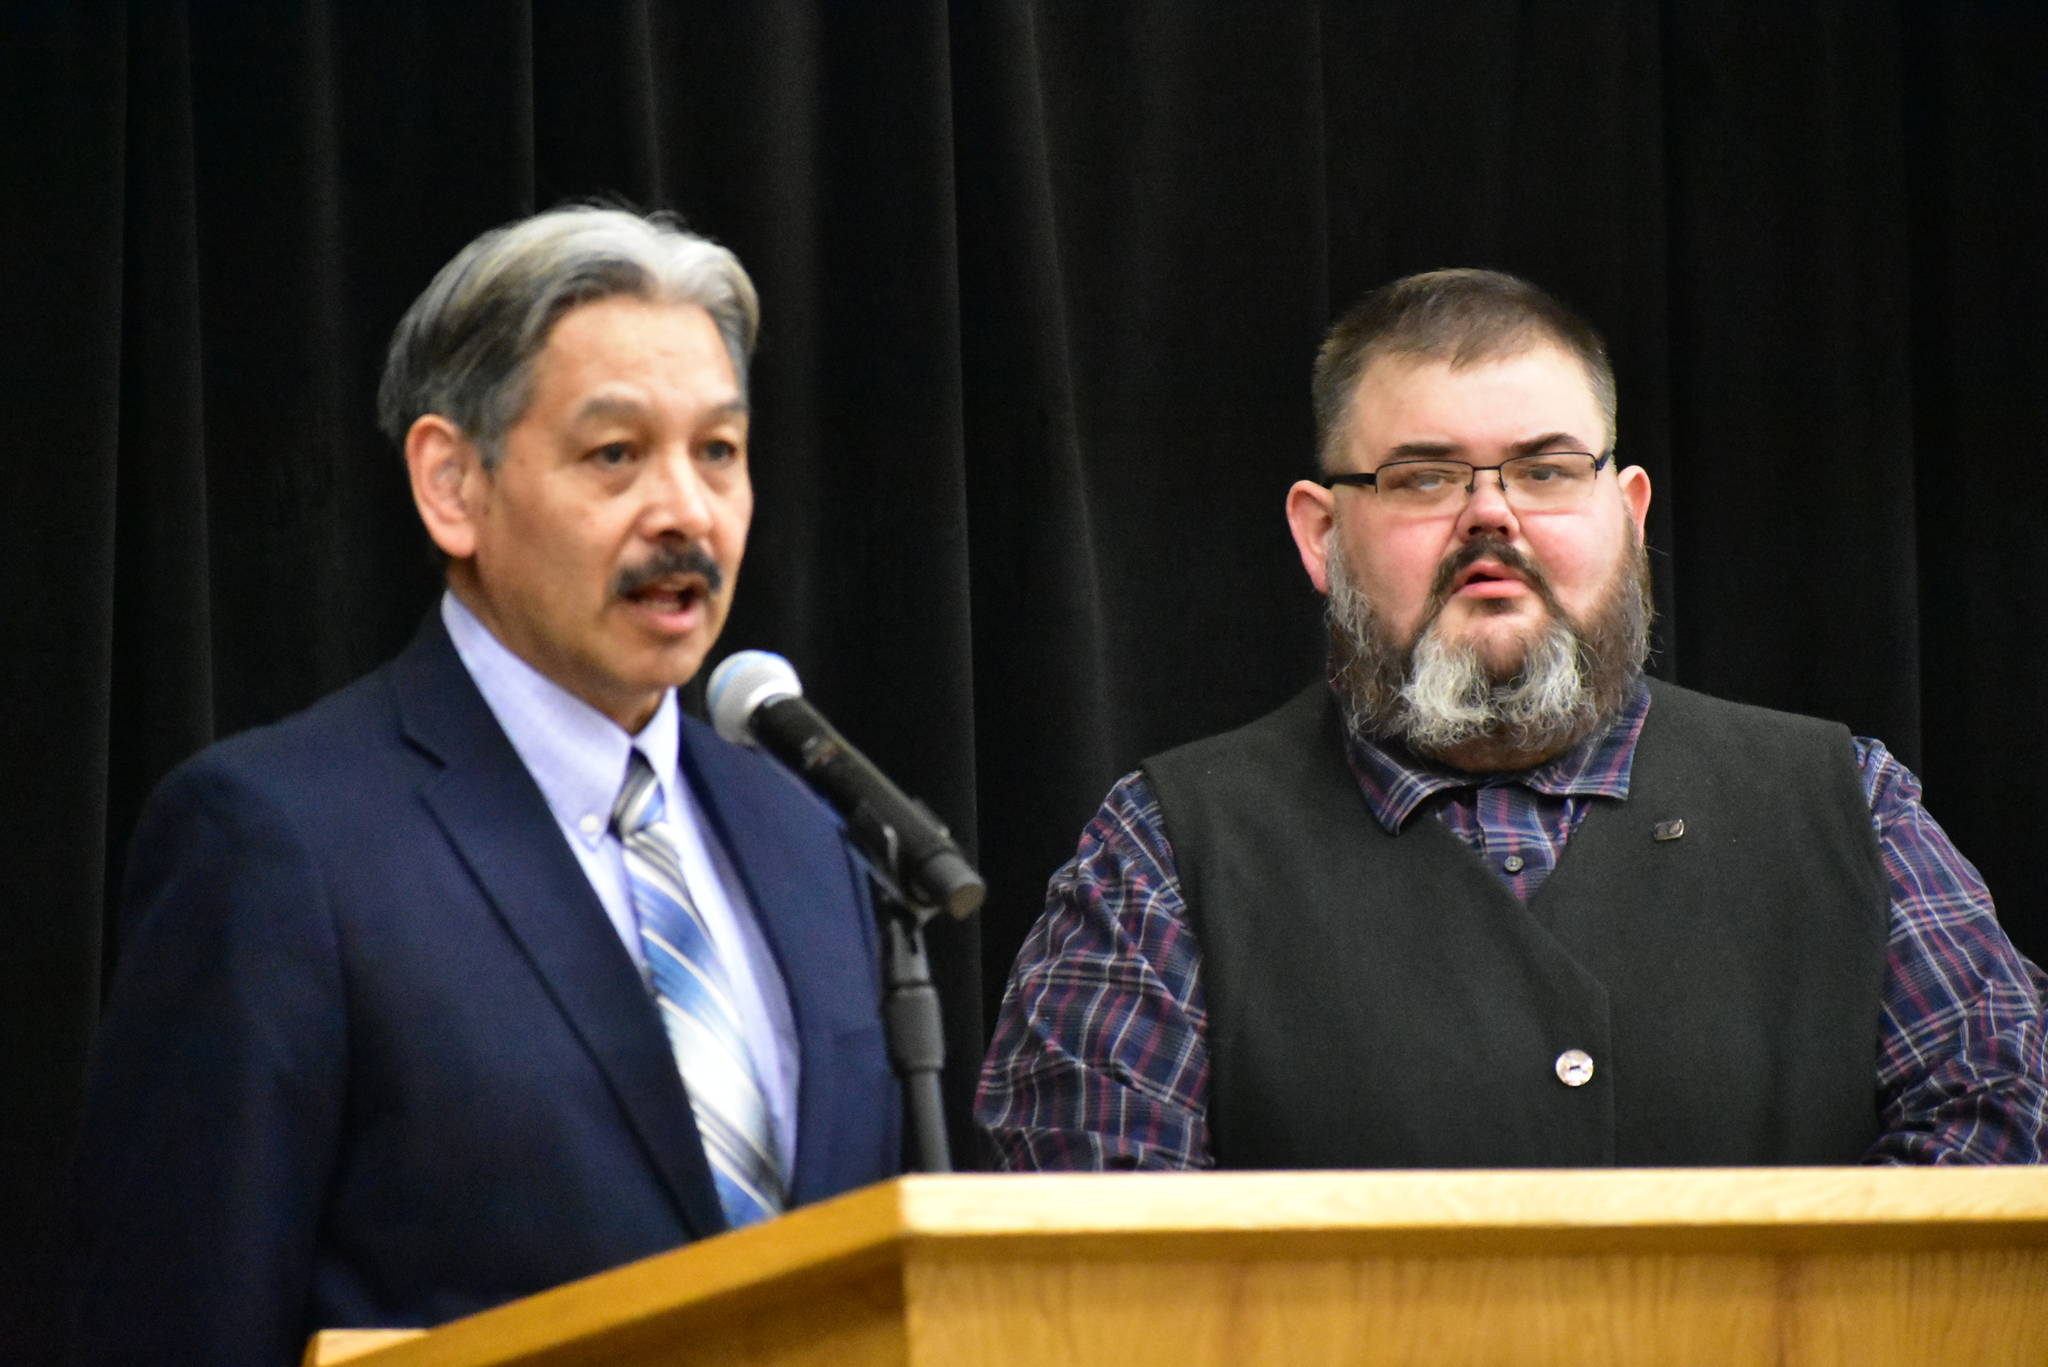 St. Paul Island Mayor Jacob Merculief, left speaks to the Native Issues Forum at Elizabeth Peratrovich Hall with Central Council of the Tlingit and Haida Indian Tribes of Alaska President Richard Chalyee Éesh Peterson on Monday, Mar. 2, 2020. (Peter Segall | Juneau Empire)